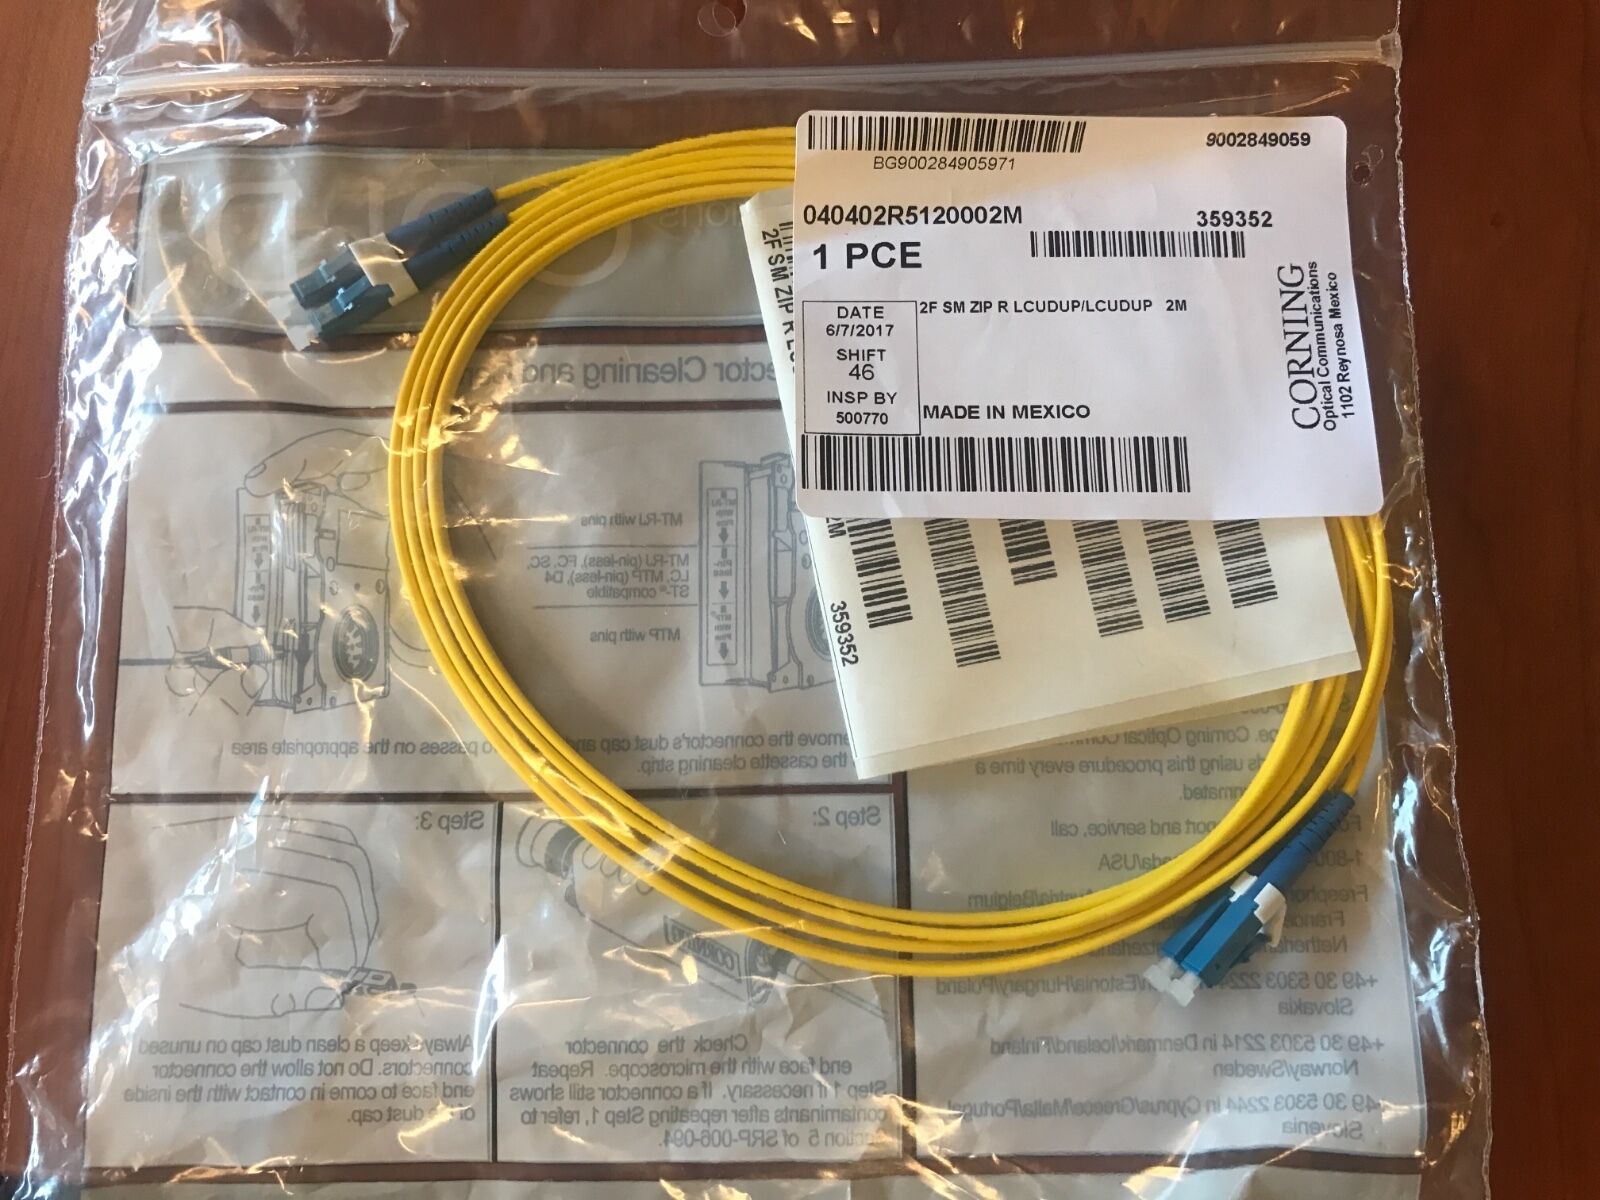 Corning Cable Systems 040402R5120002M FIBER OPTIC